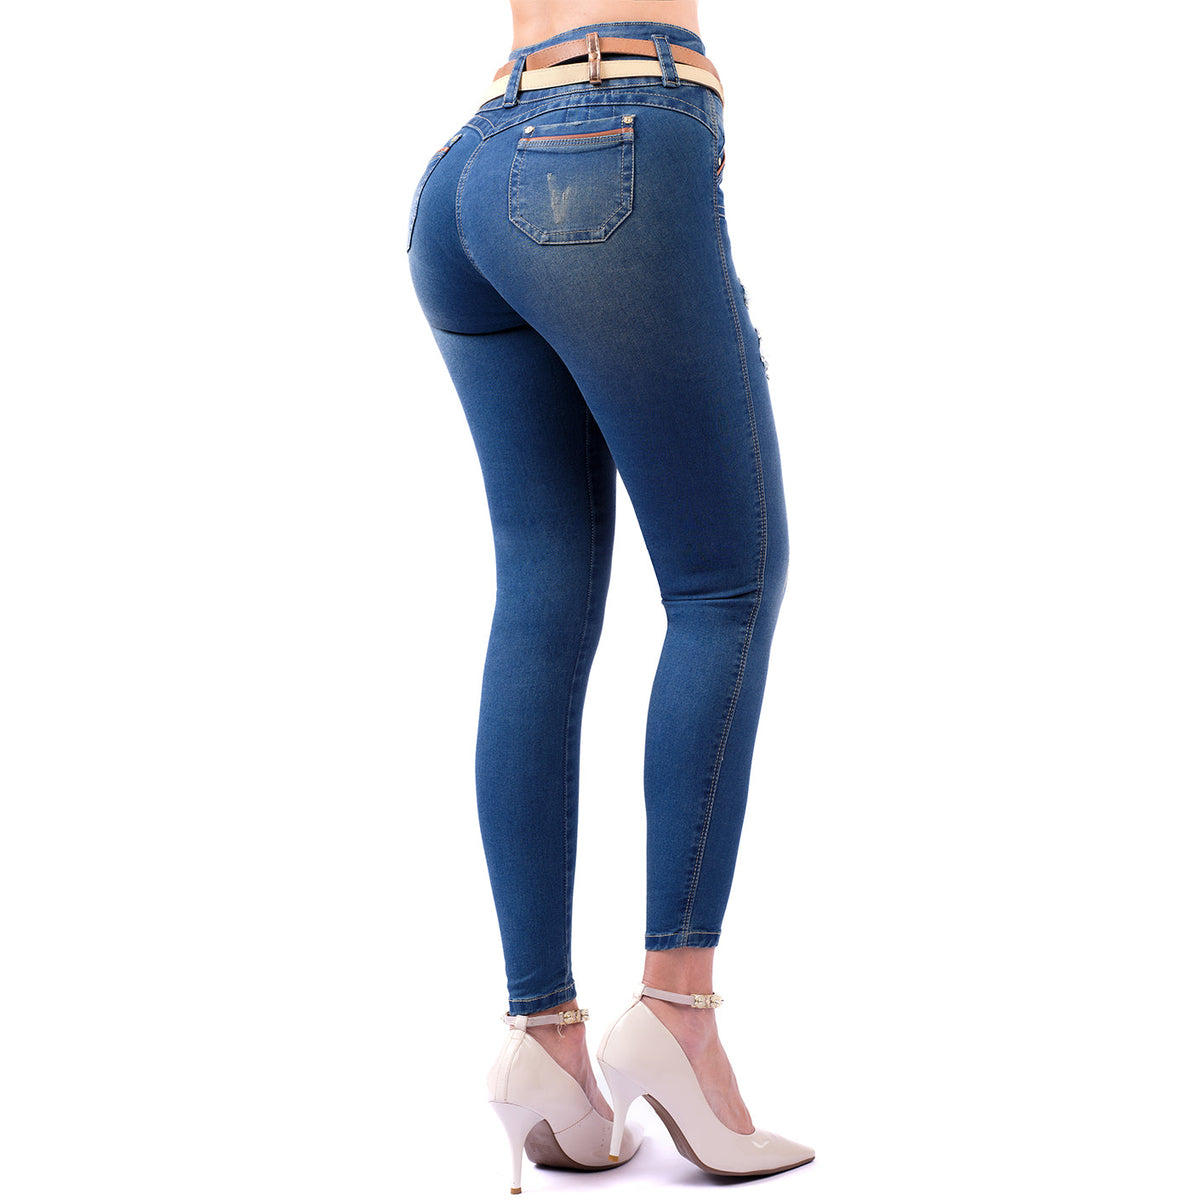 LT. Rose 1504 Ripped Skinny Butt Lifting Jeans